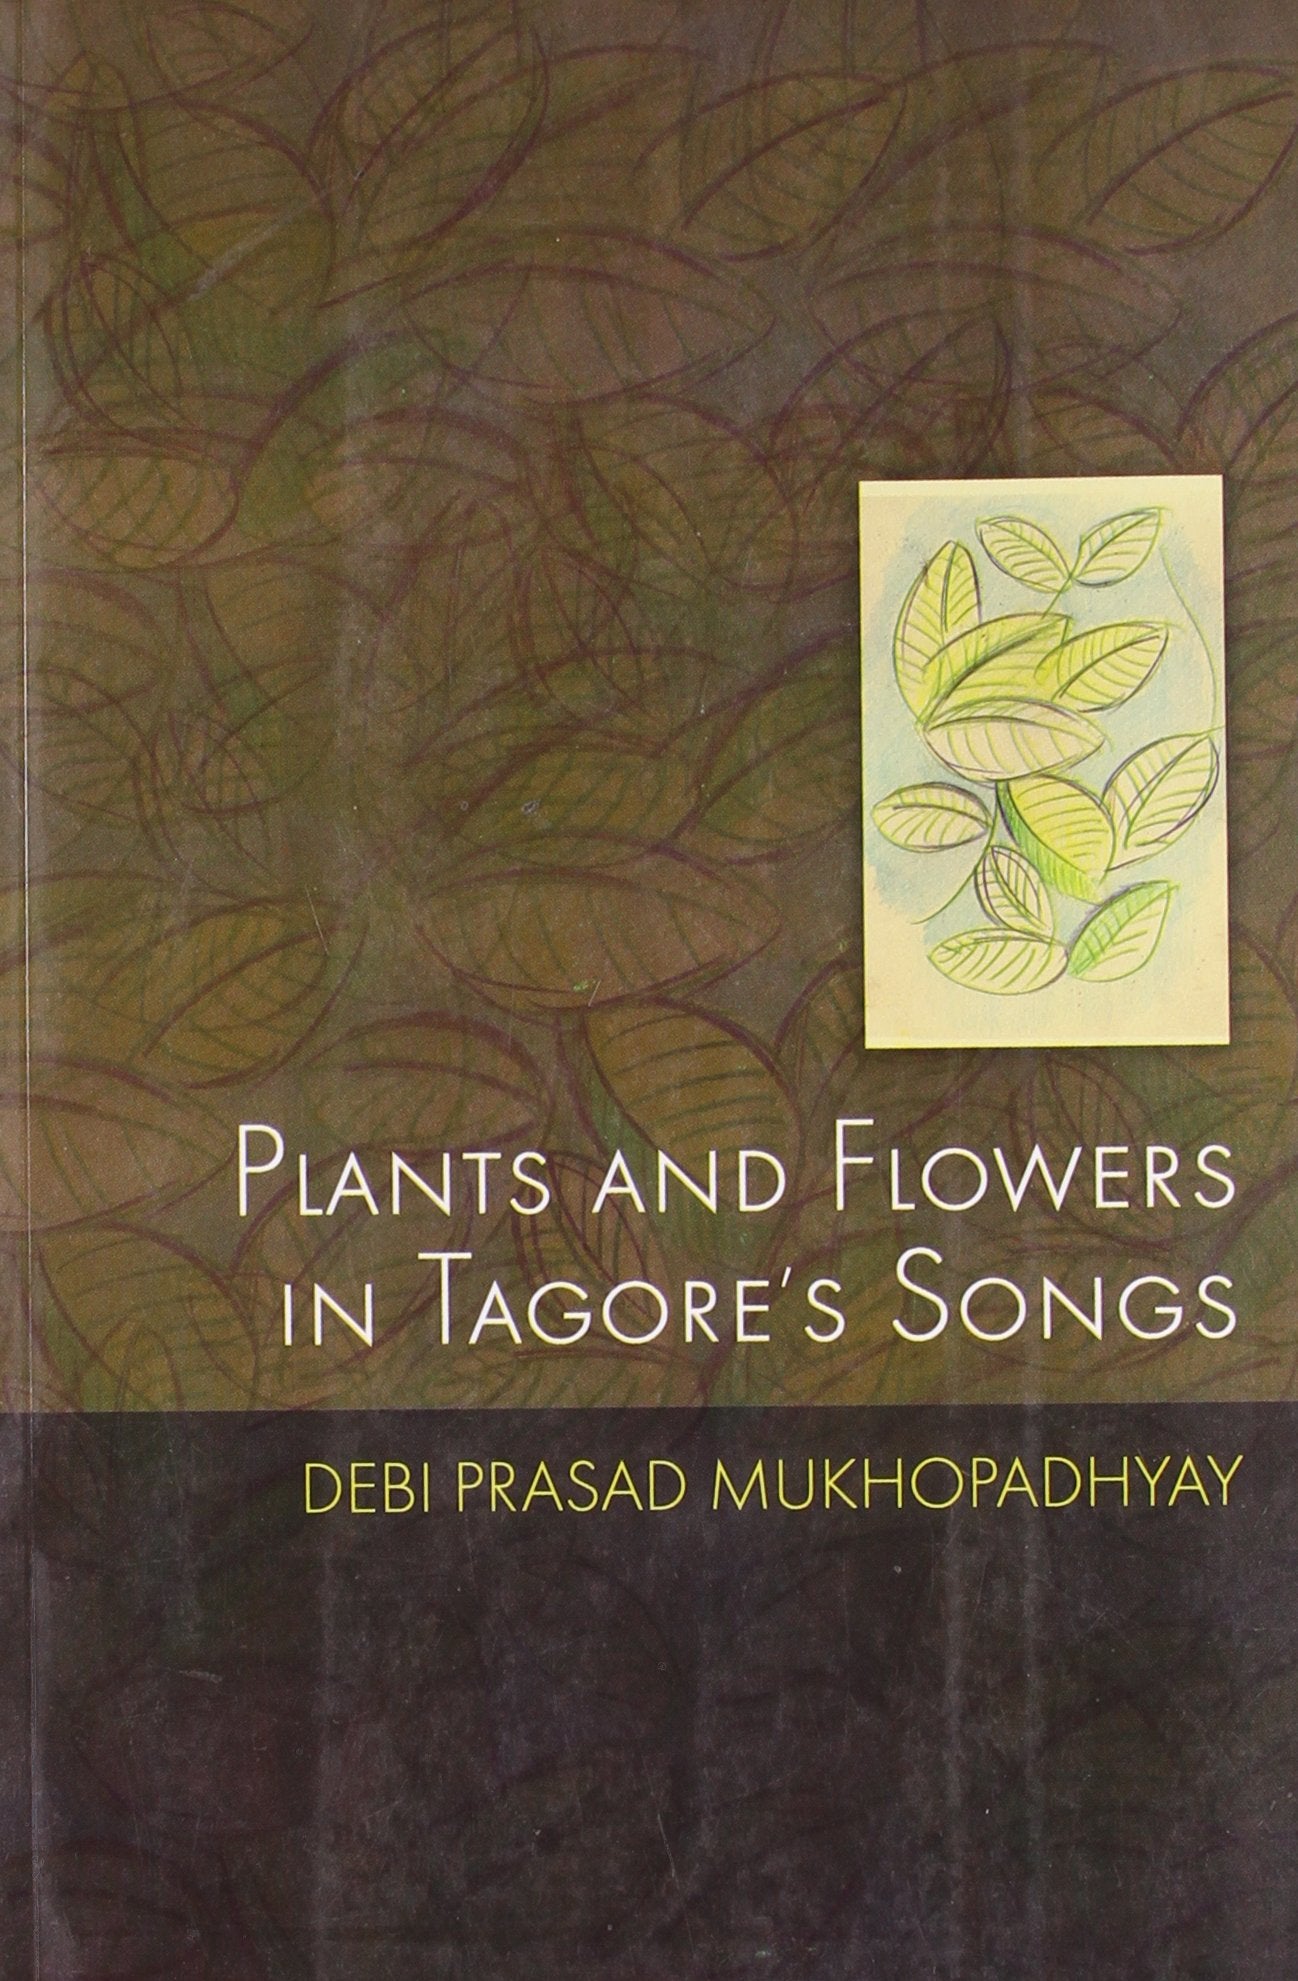 Plants and Flowers in Tagore’s Songs